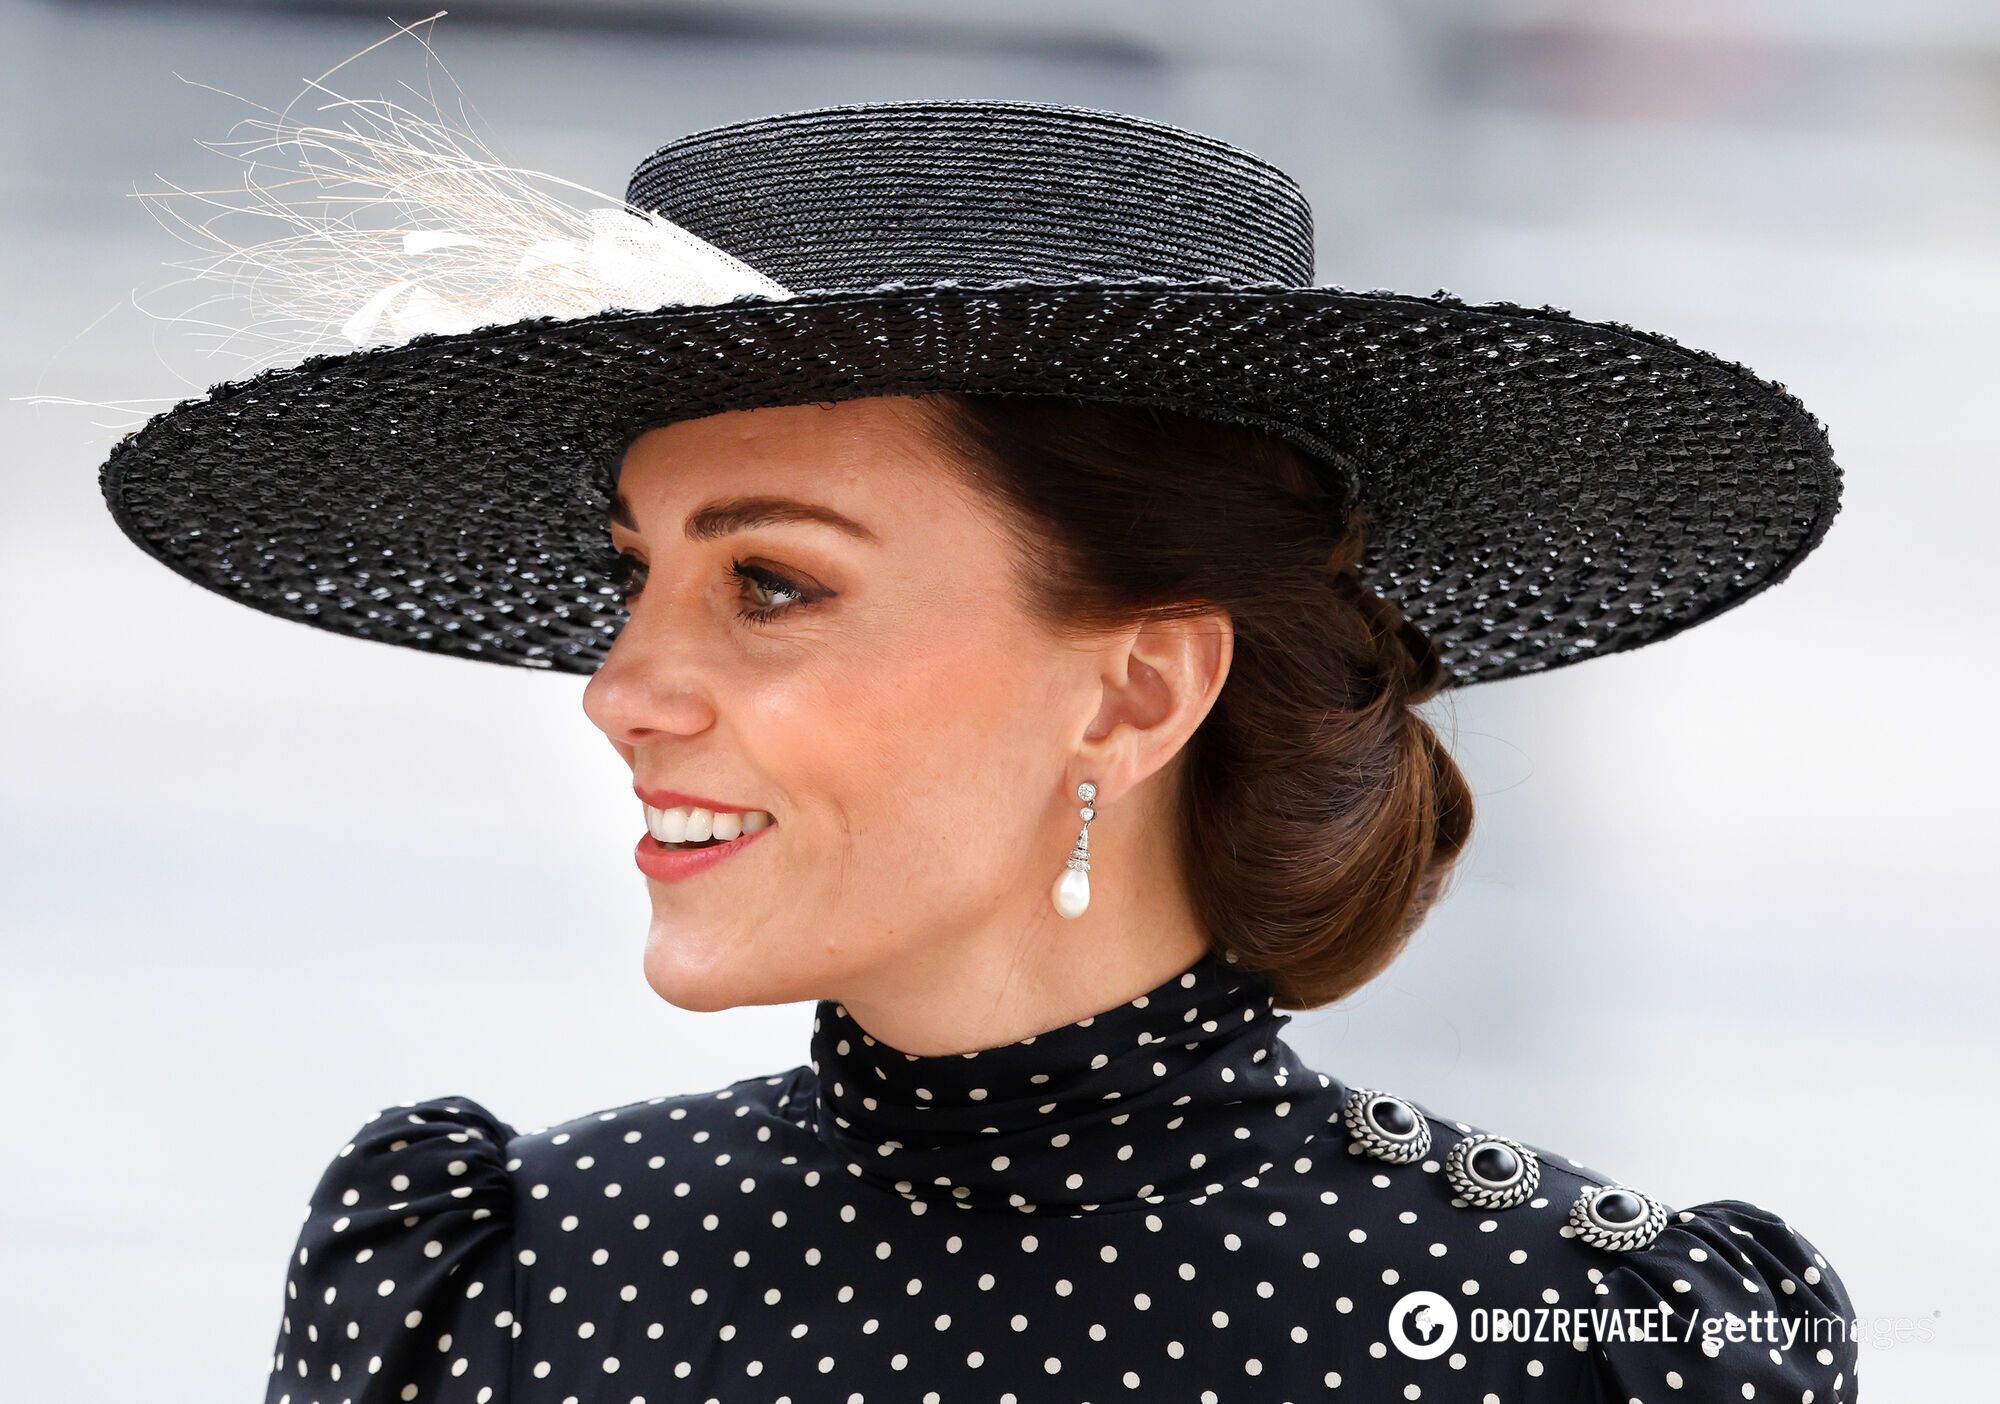 Kate Middleton cut off her bangs and darkened her hair: how the Princess of Wales's hairstyles have changed over 40 years. Photo